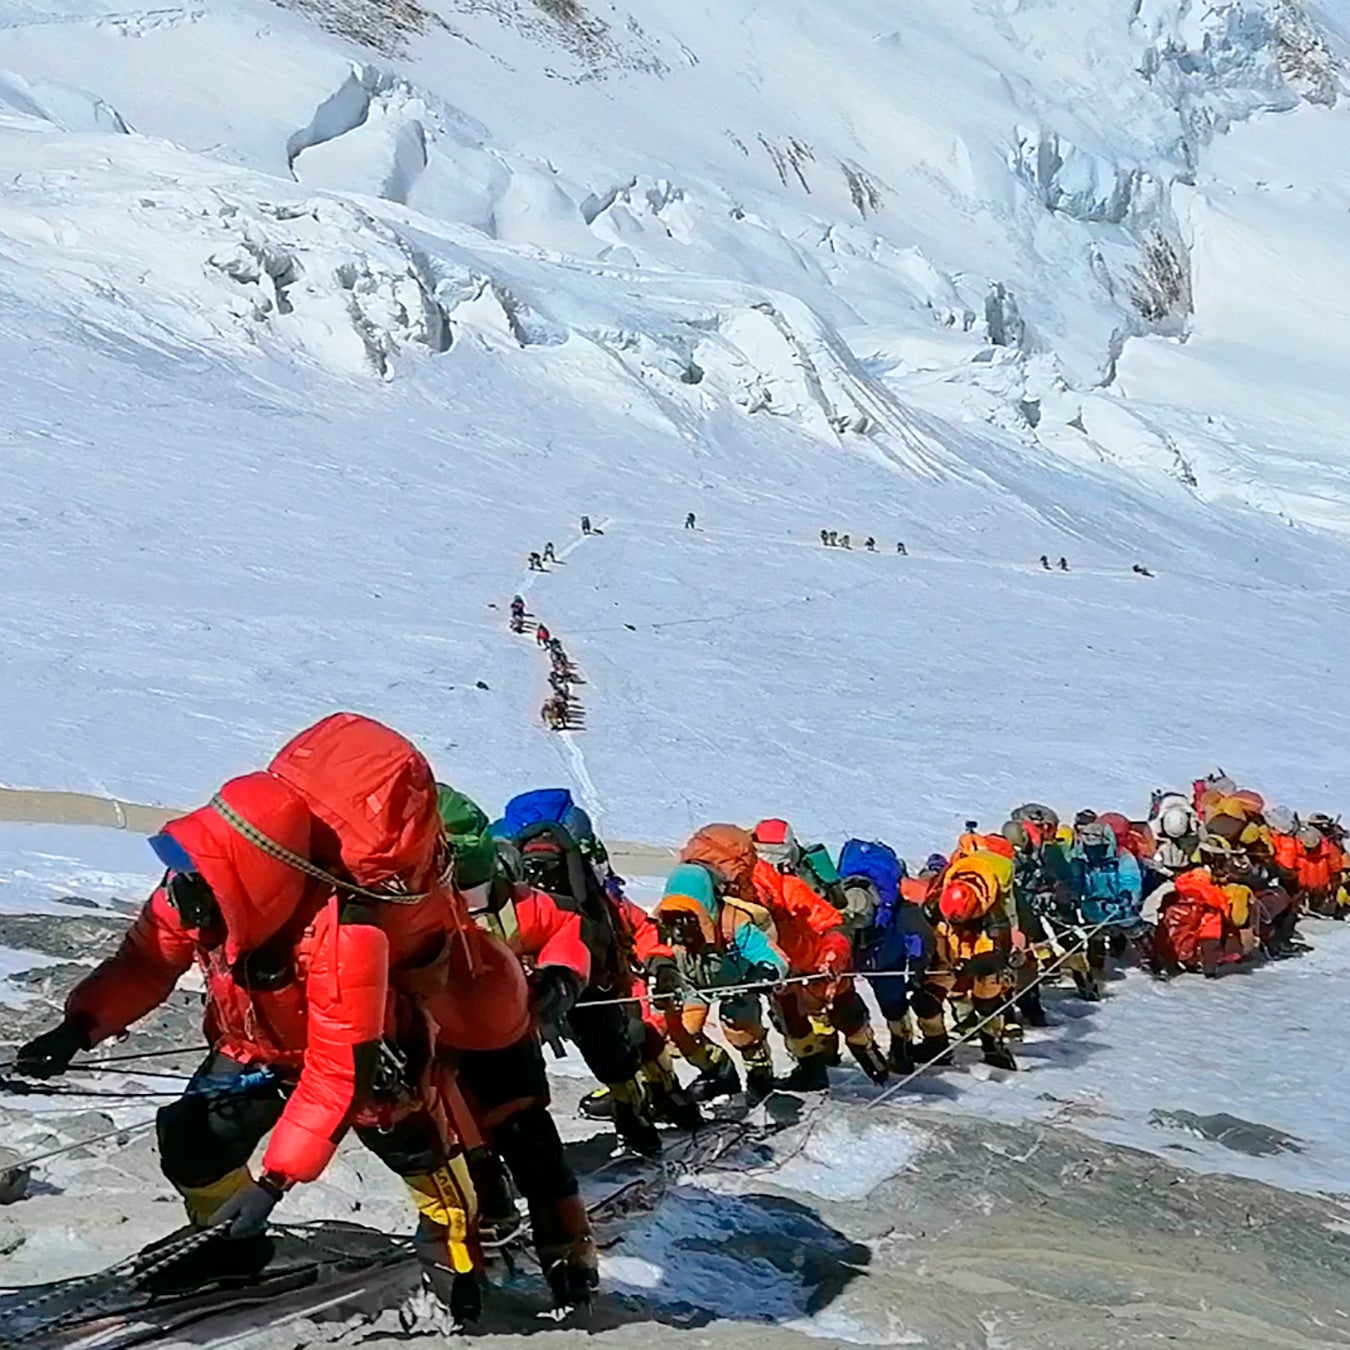 Mount Everest Has New Rules for Pooping